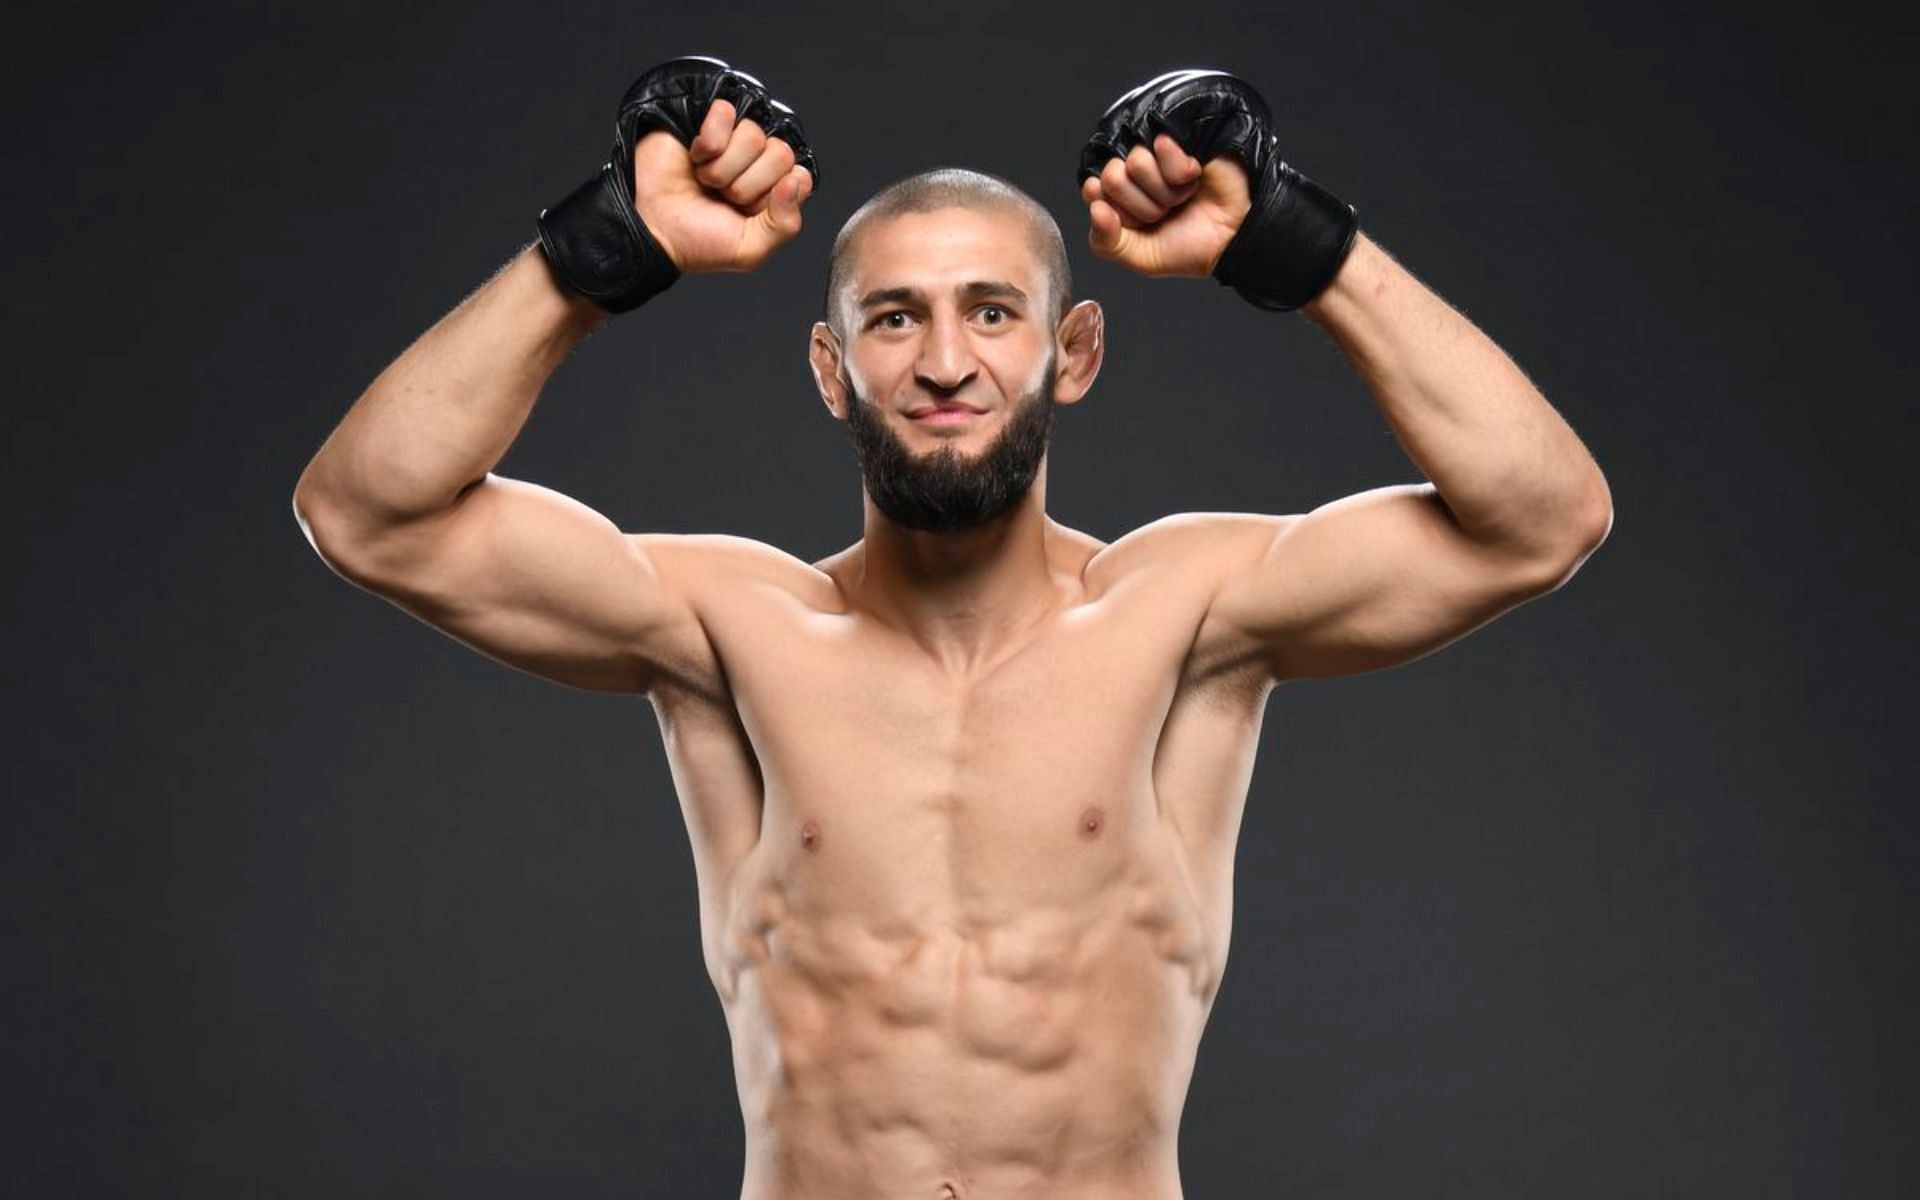 Khamzat Chimaev has the star power to become a huge draw for the UFC in the future